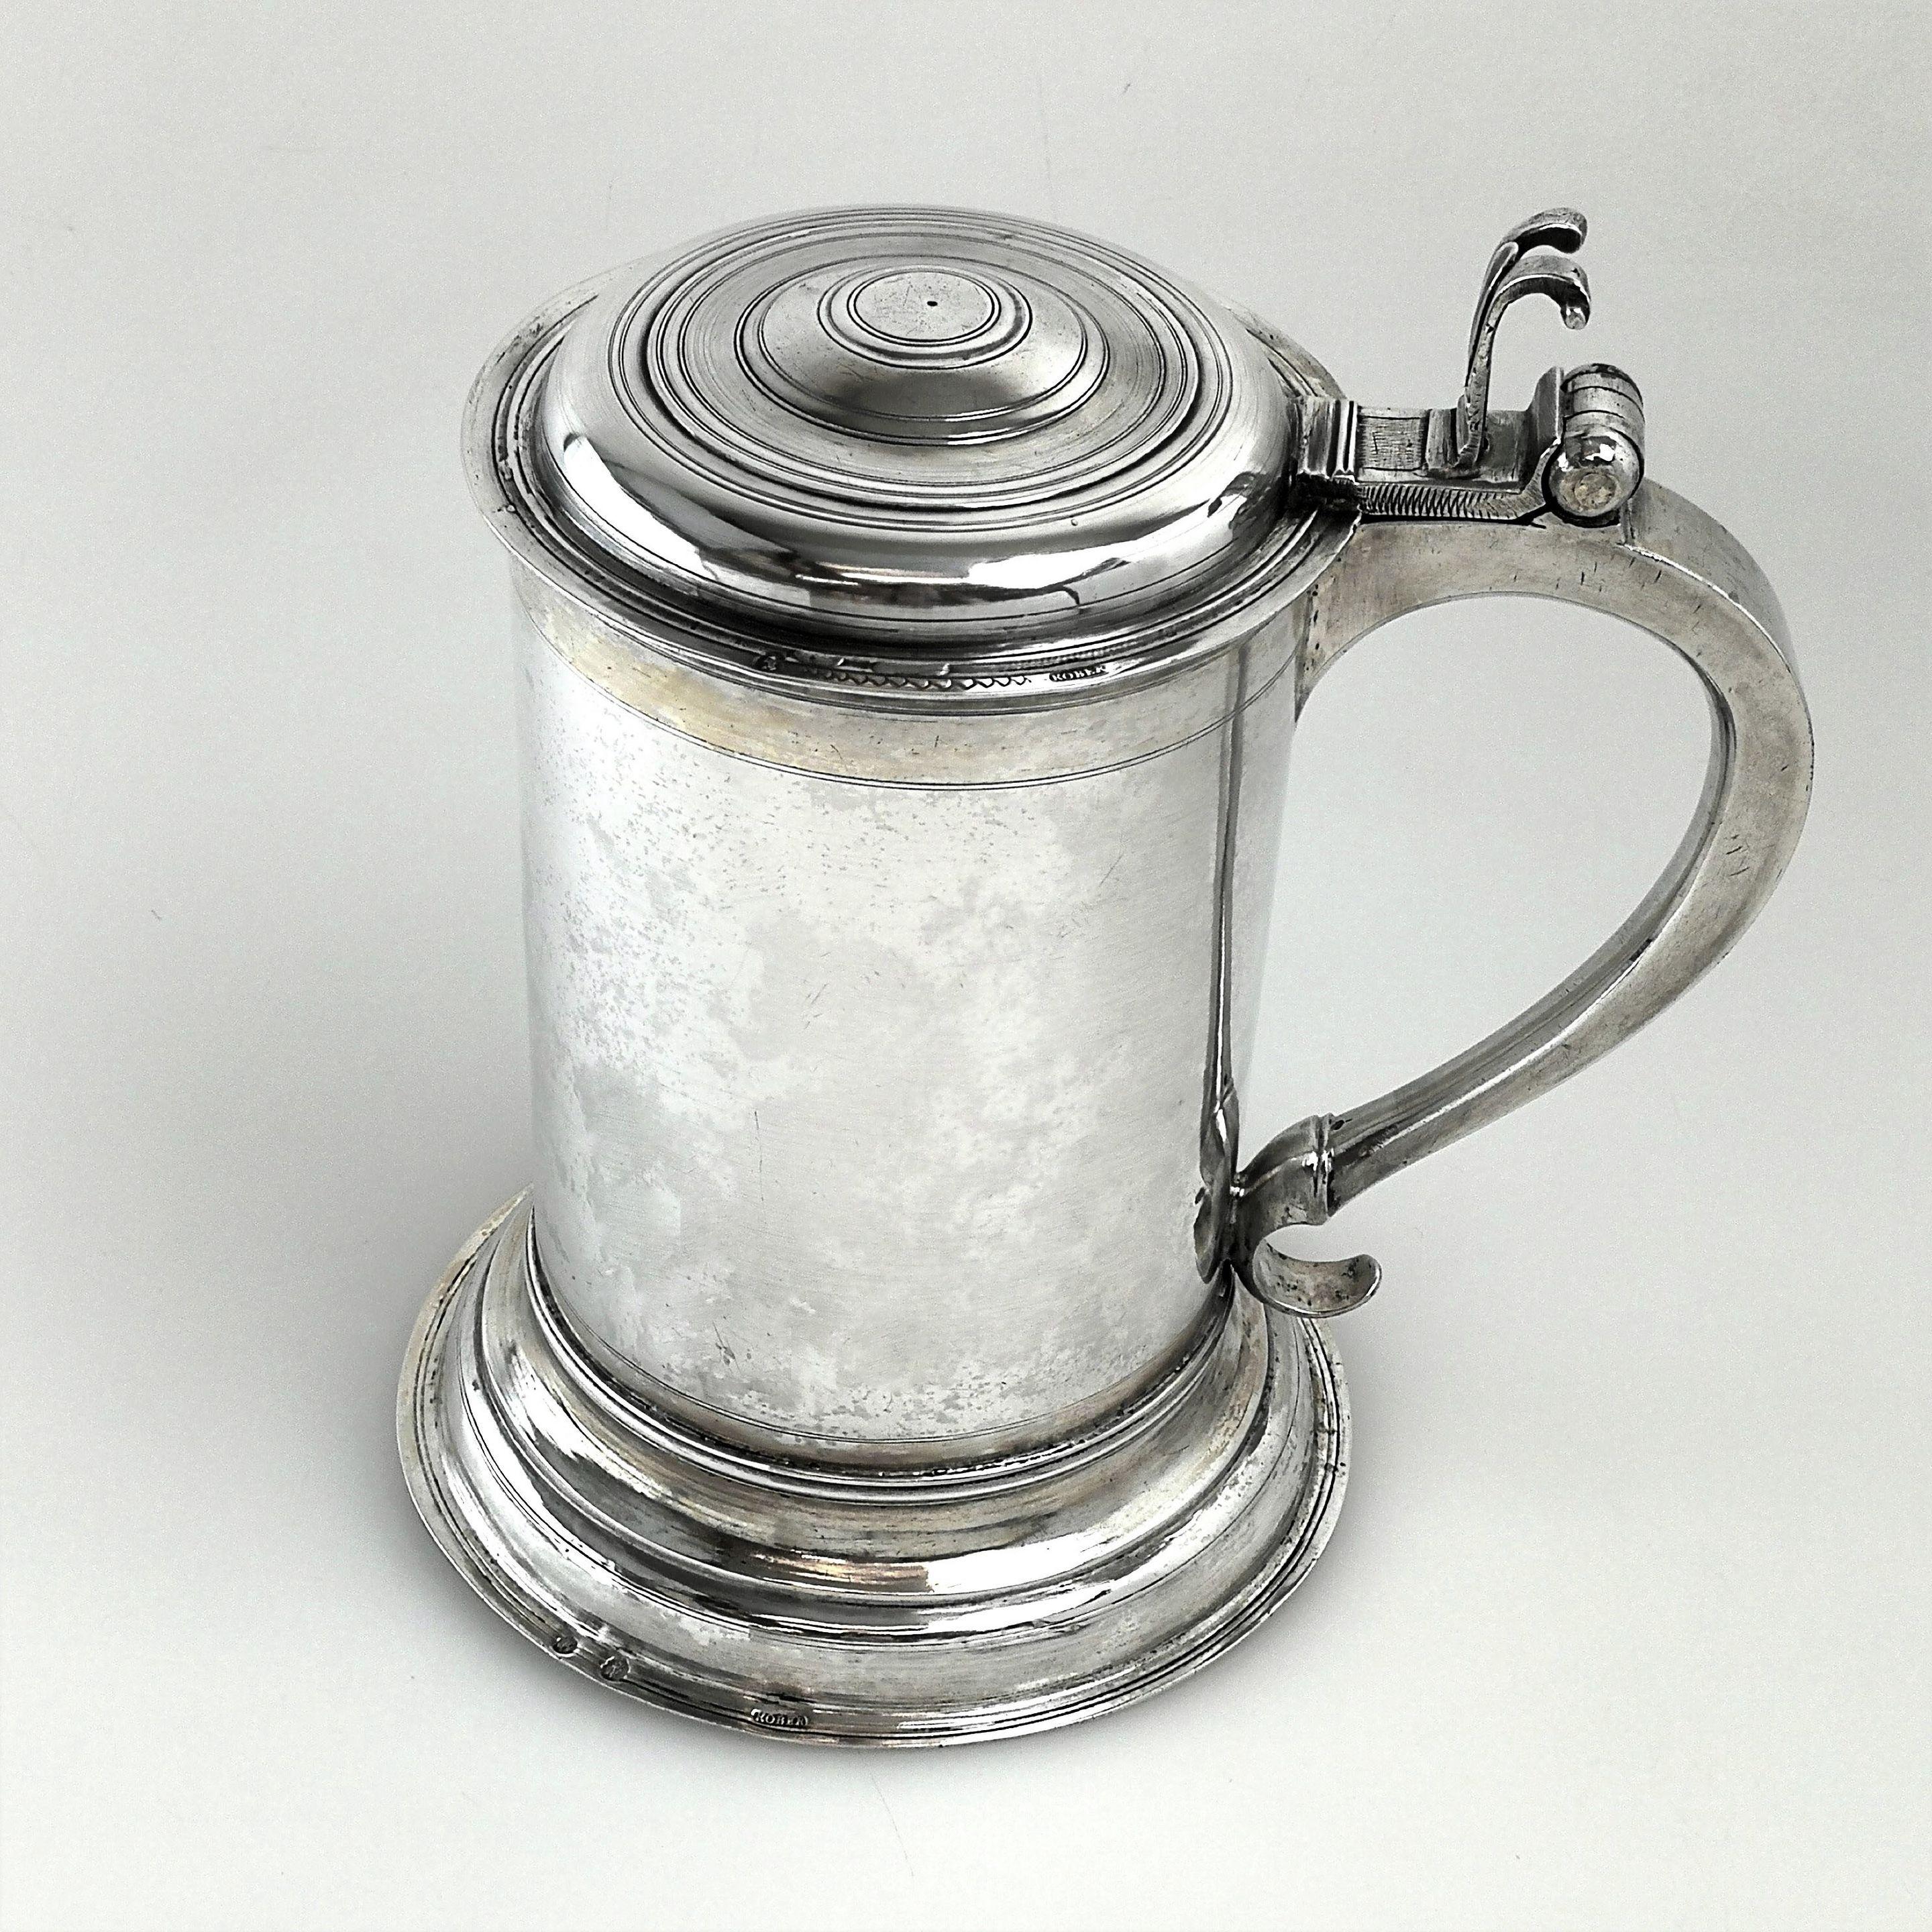 A wonderful early 18th century Antique German Silver lidded Tankard in a traditional straight sided design with a low domed lid. This Tankard has a wide spread foot and a tall thumb piece. 
 
 Made in Berlin, Germany in circa 1700 by Thomas Kober.
